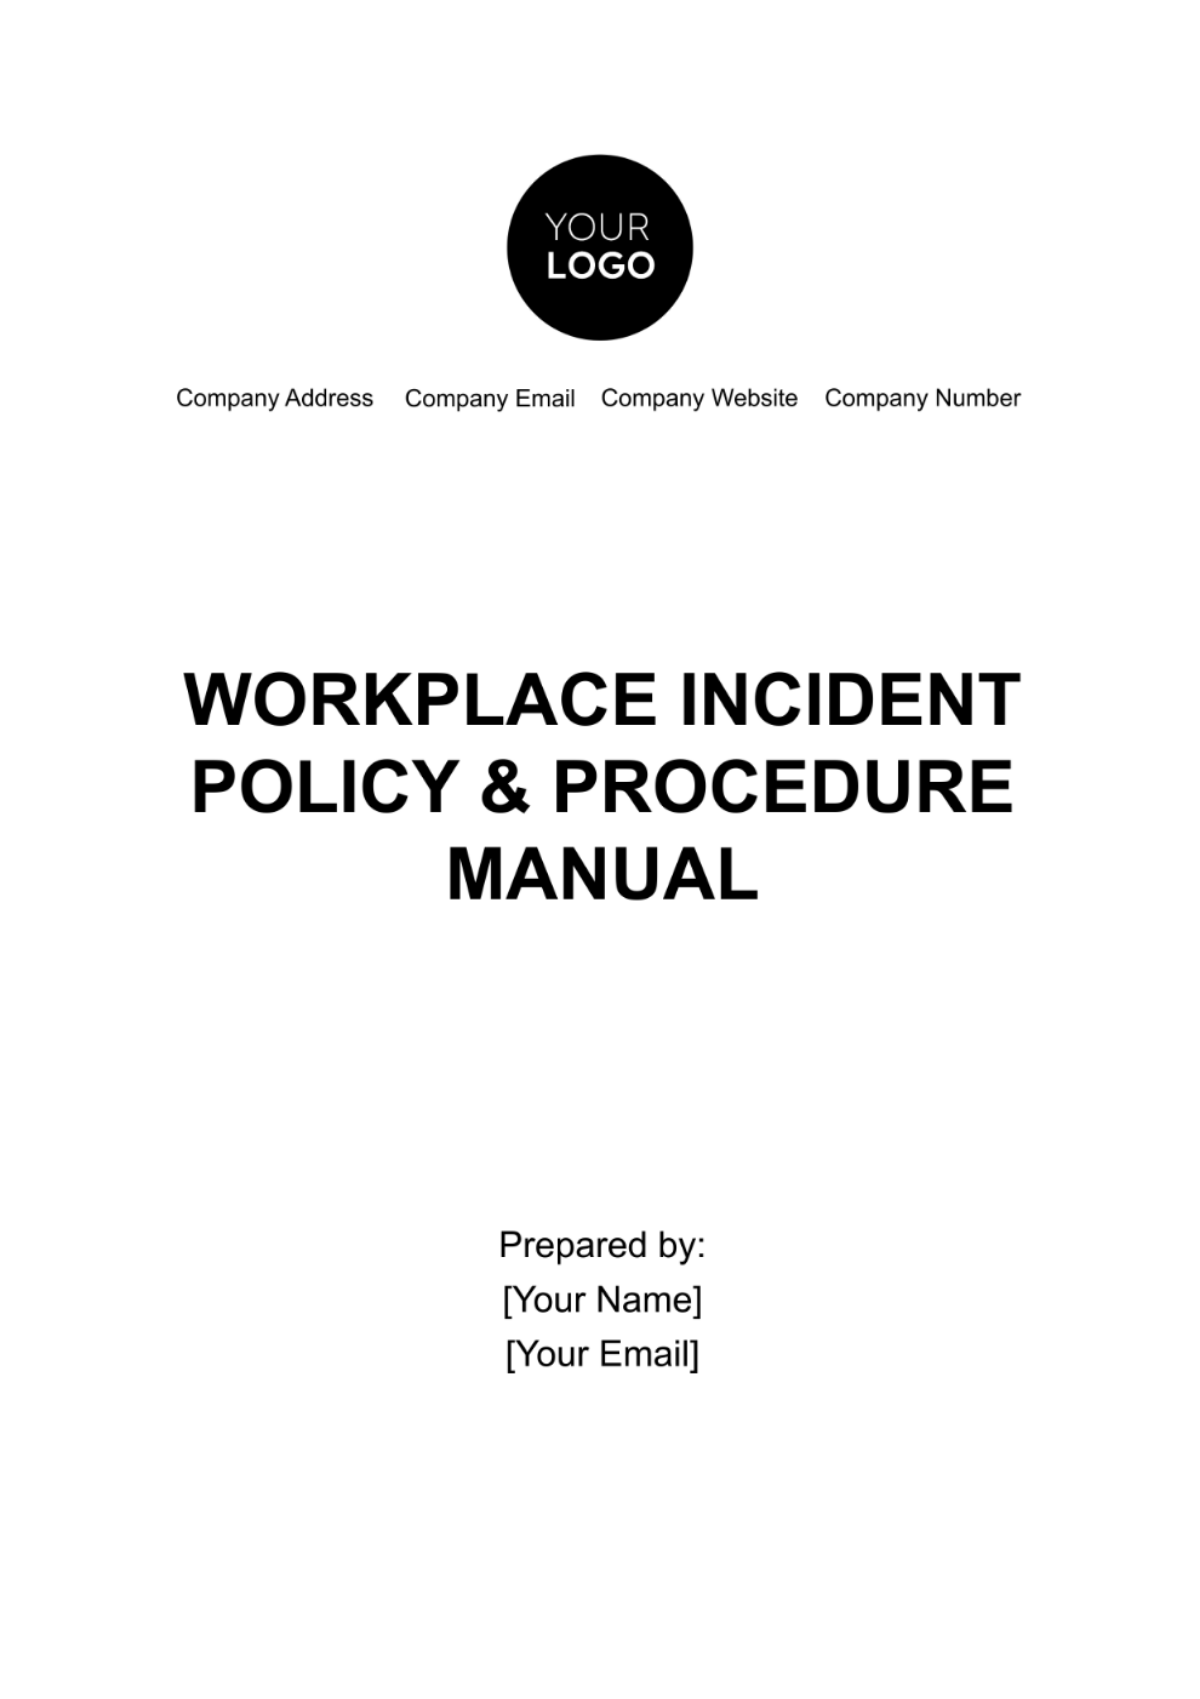 Free Workplace Incident Policy & Procedure Manual Template